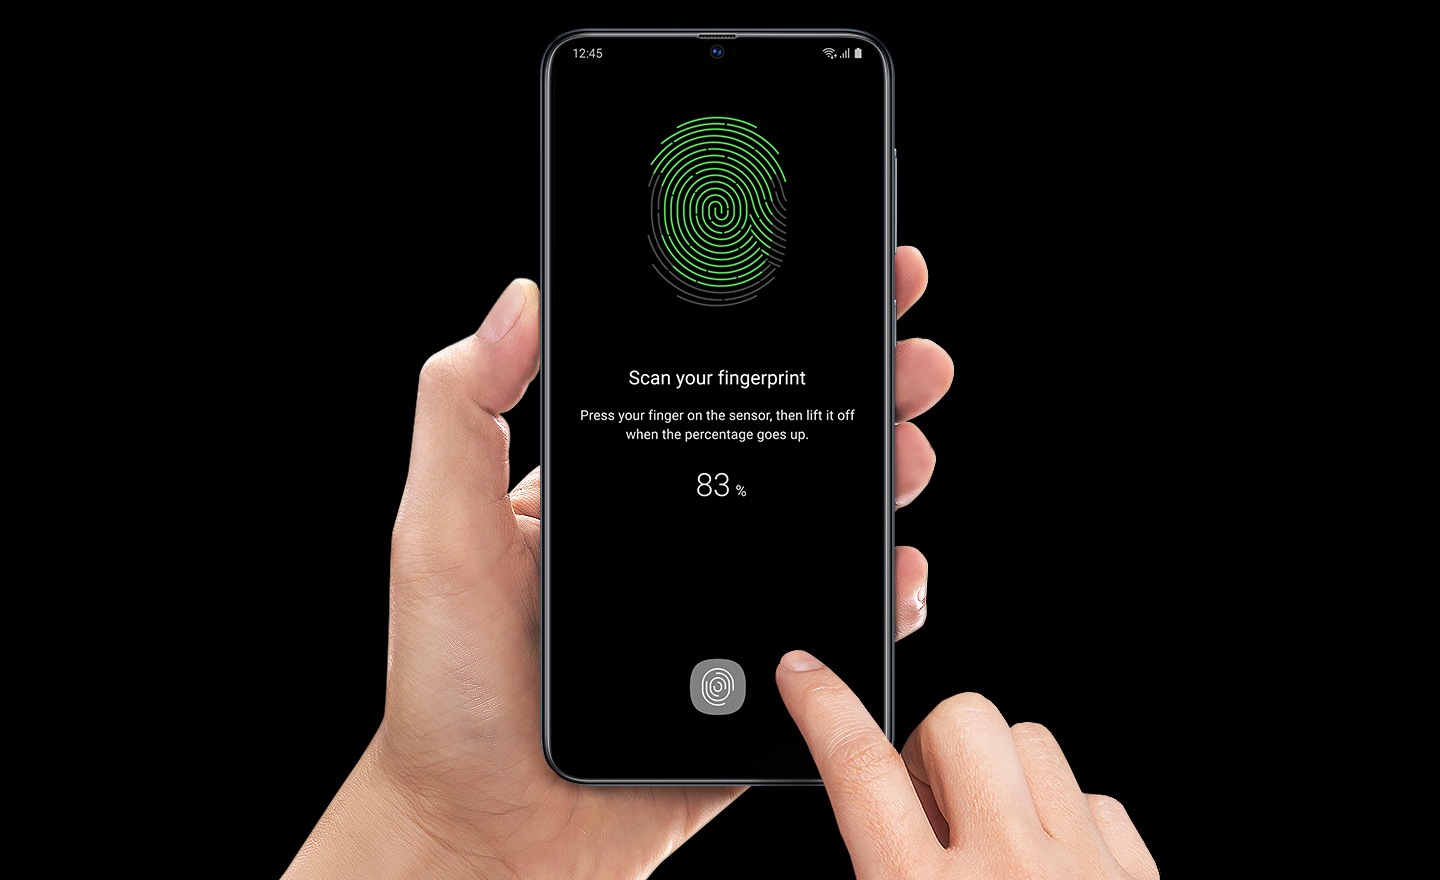 Samsung Galaxy A70 with on-screen biometric authentication